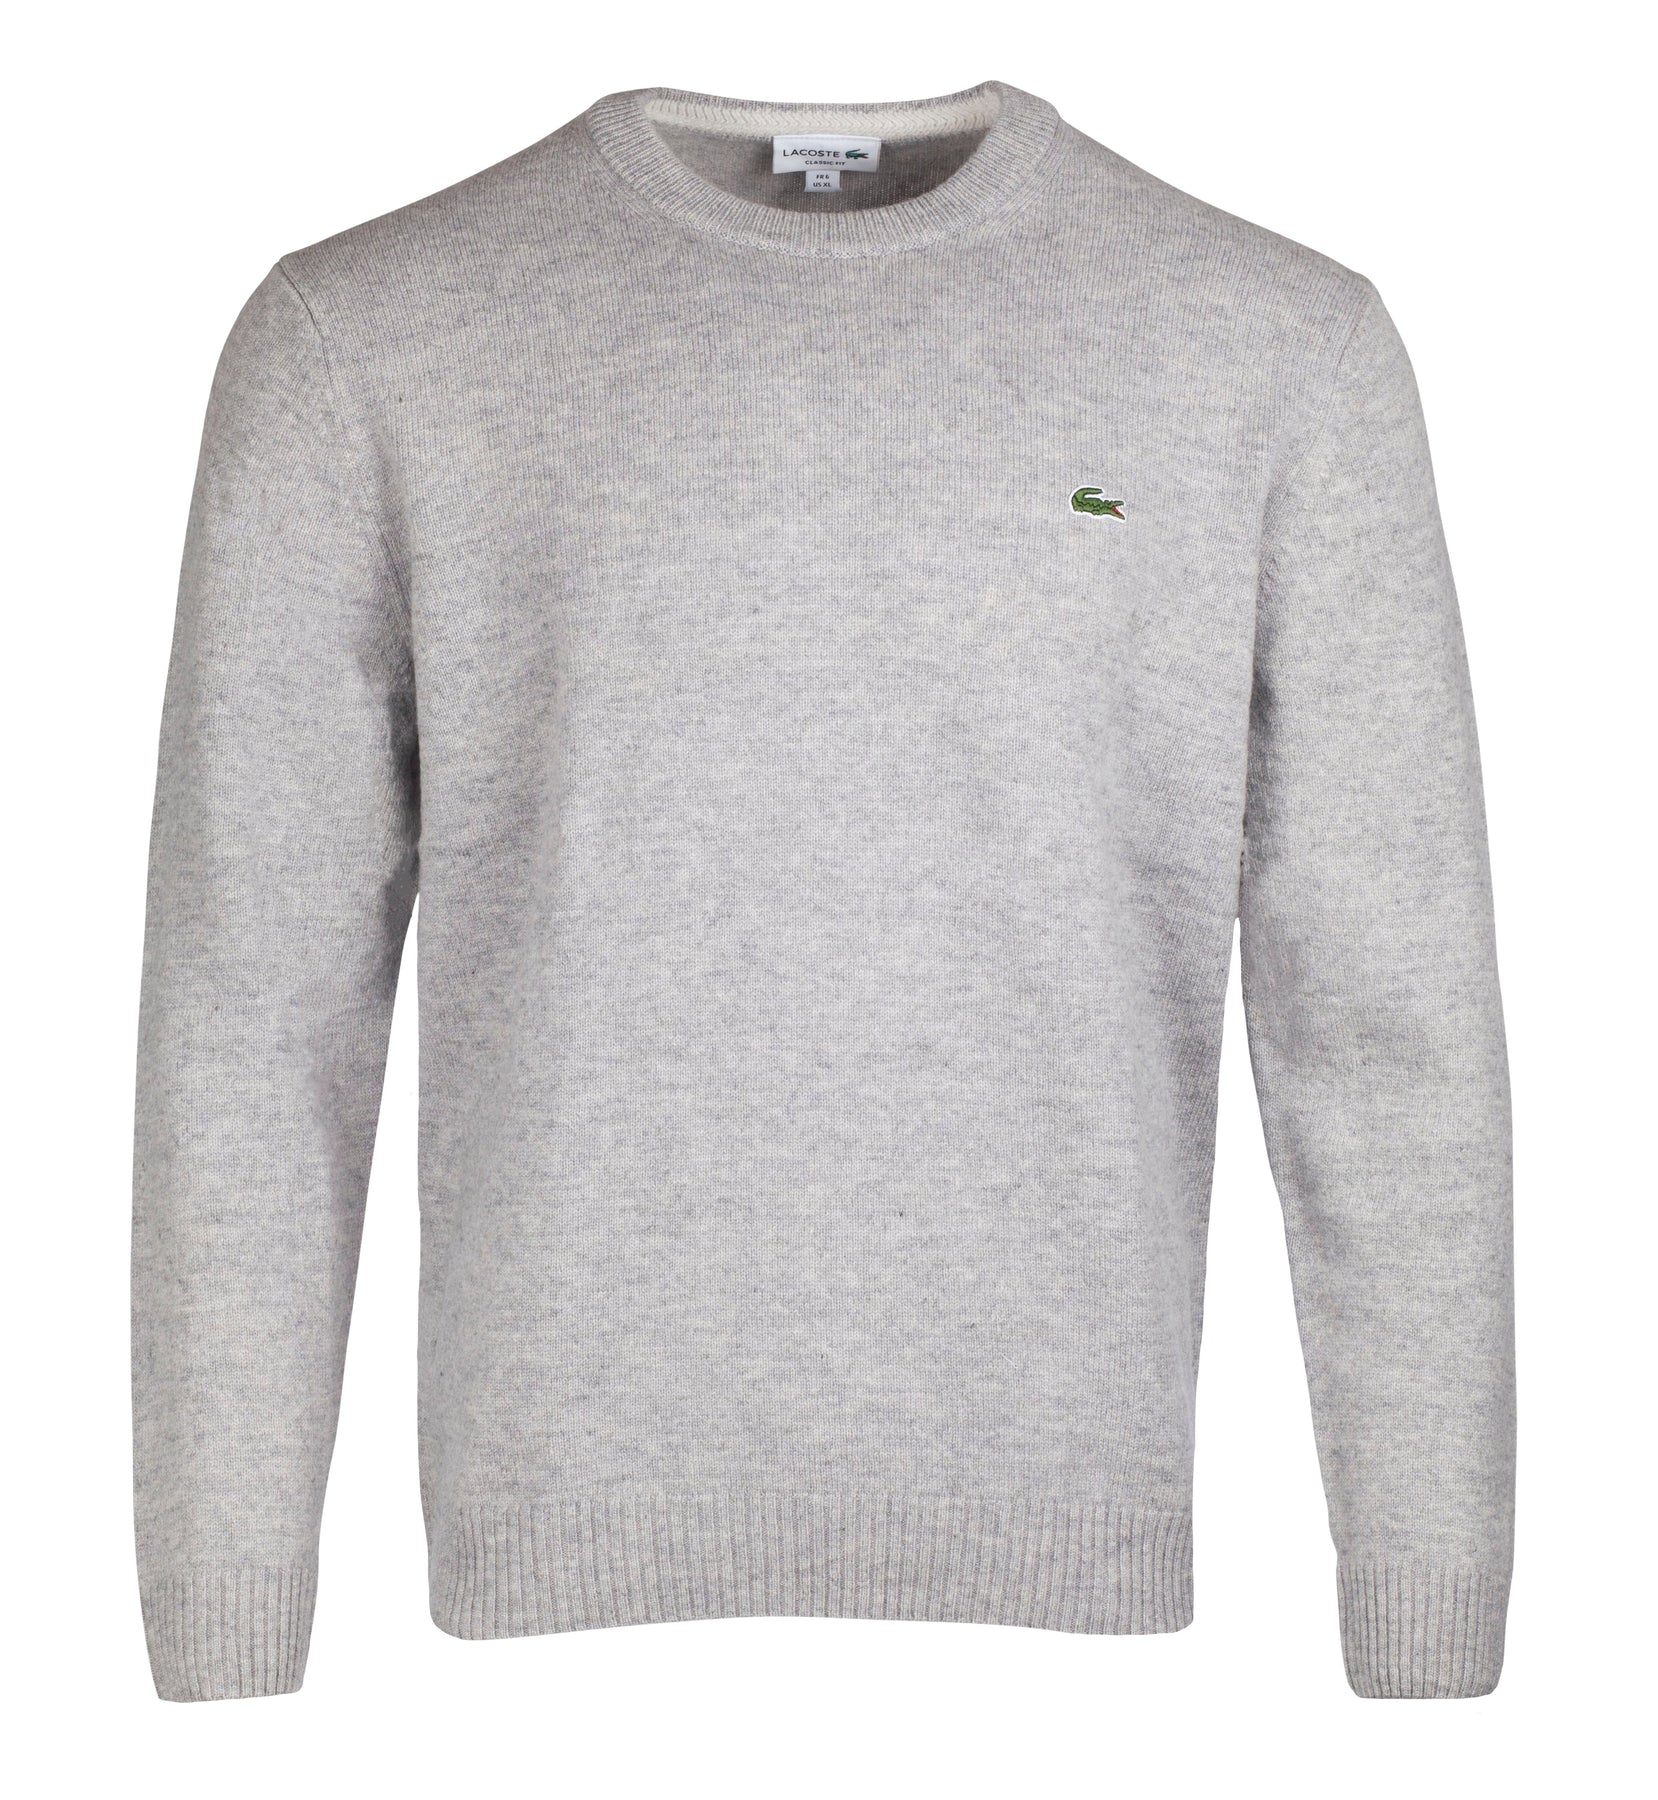 Lacoste Crew Neck Wool Sweater - Silver Chine